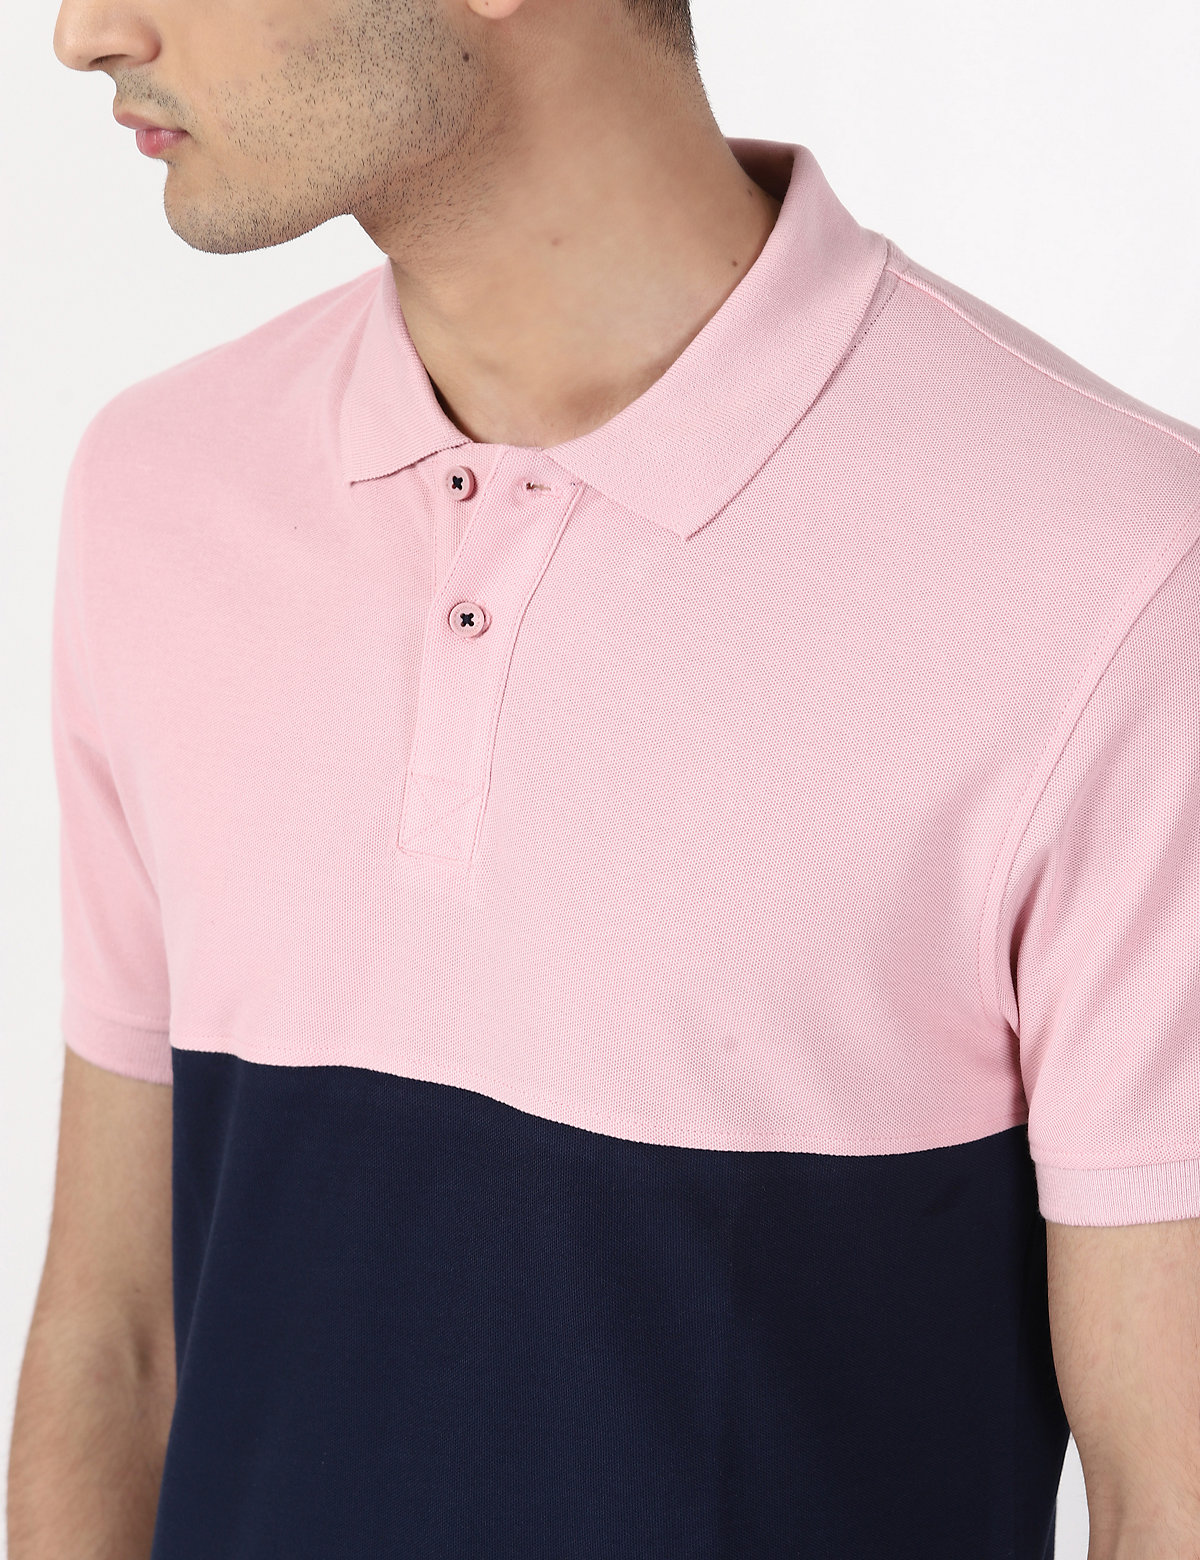 Mens Polo Tailored Collar Cut & Sew Top